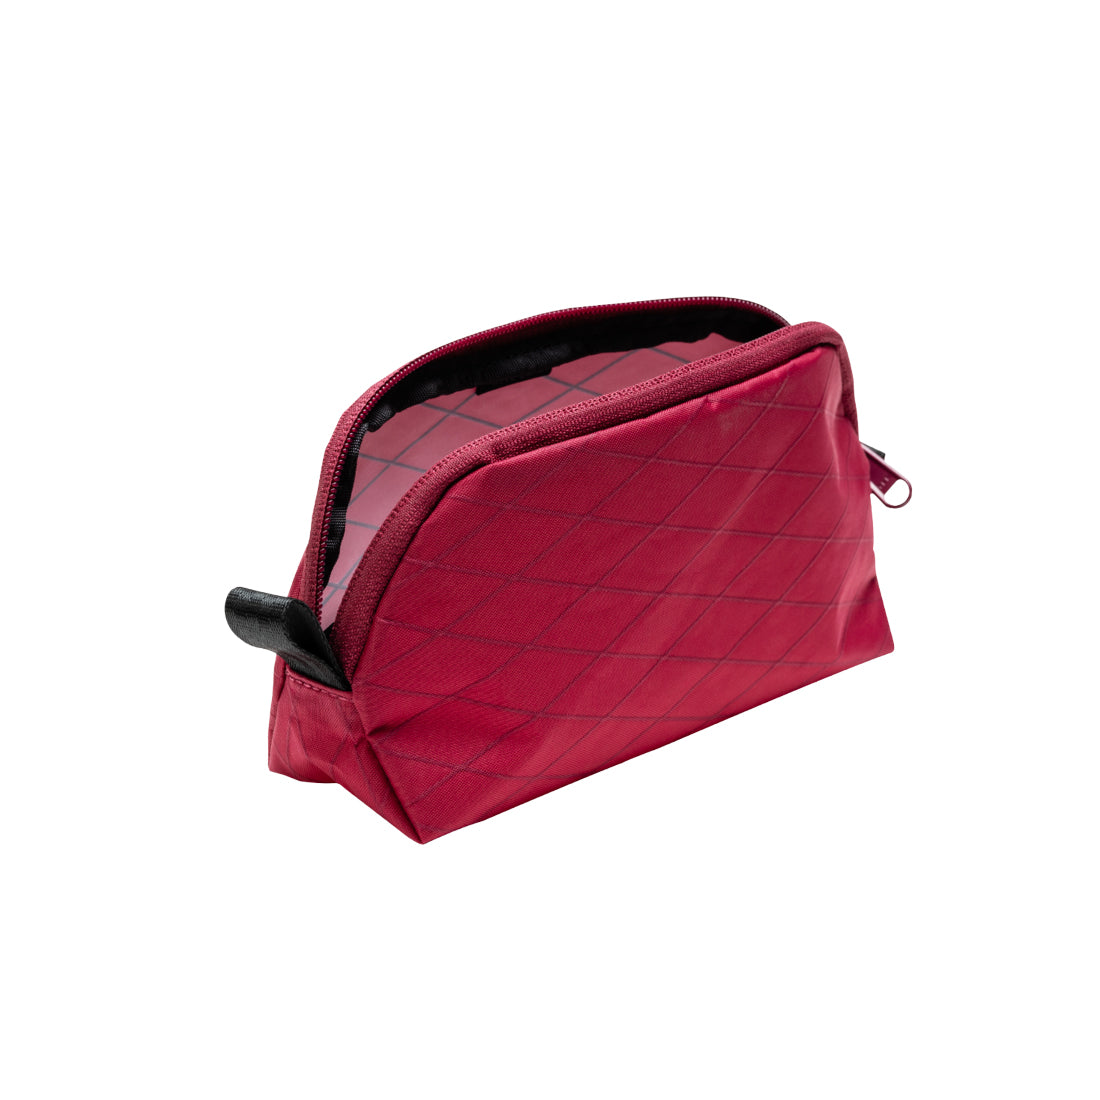 Able Carry : The Daily Stash Pouch : X-Pac Port Red